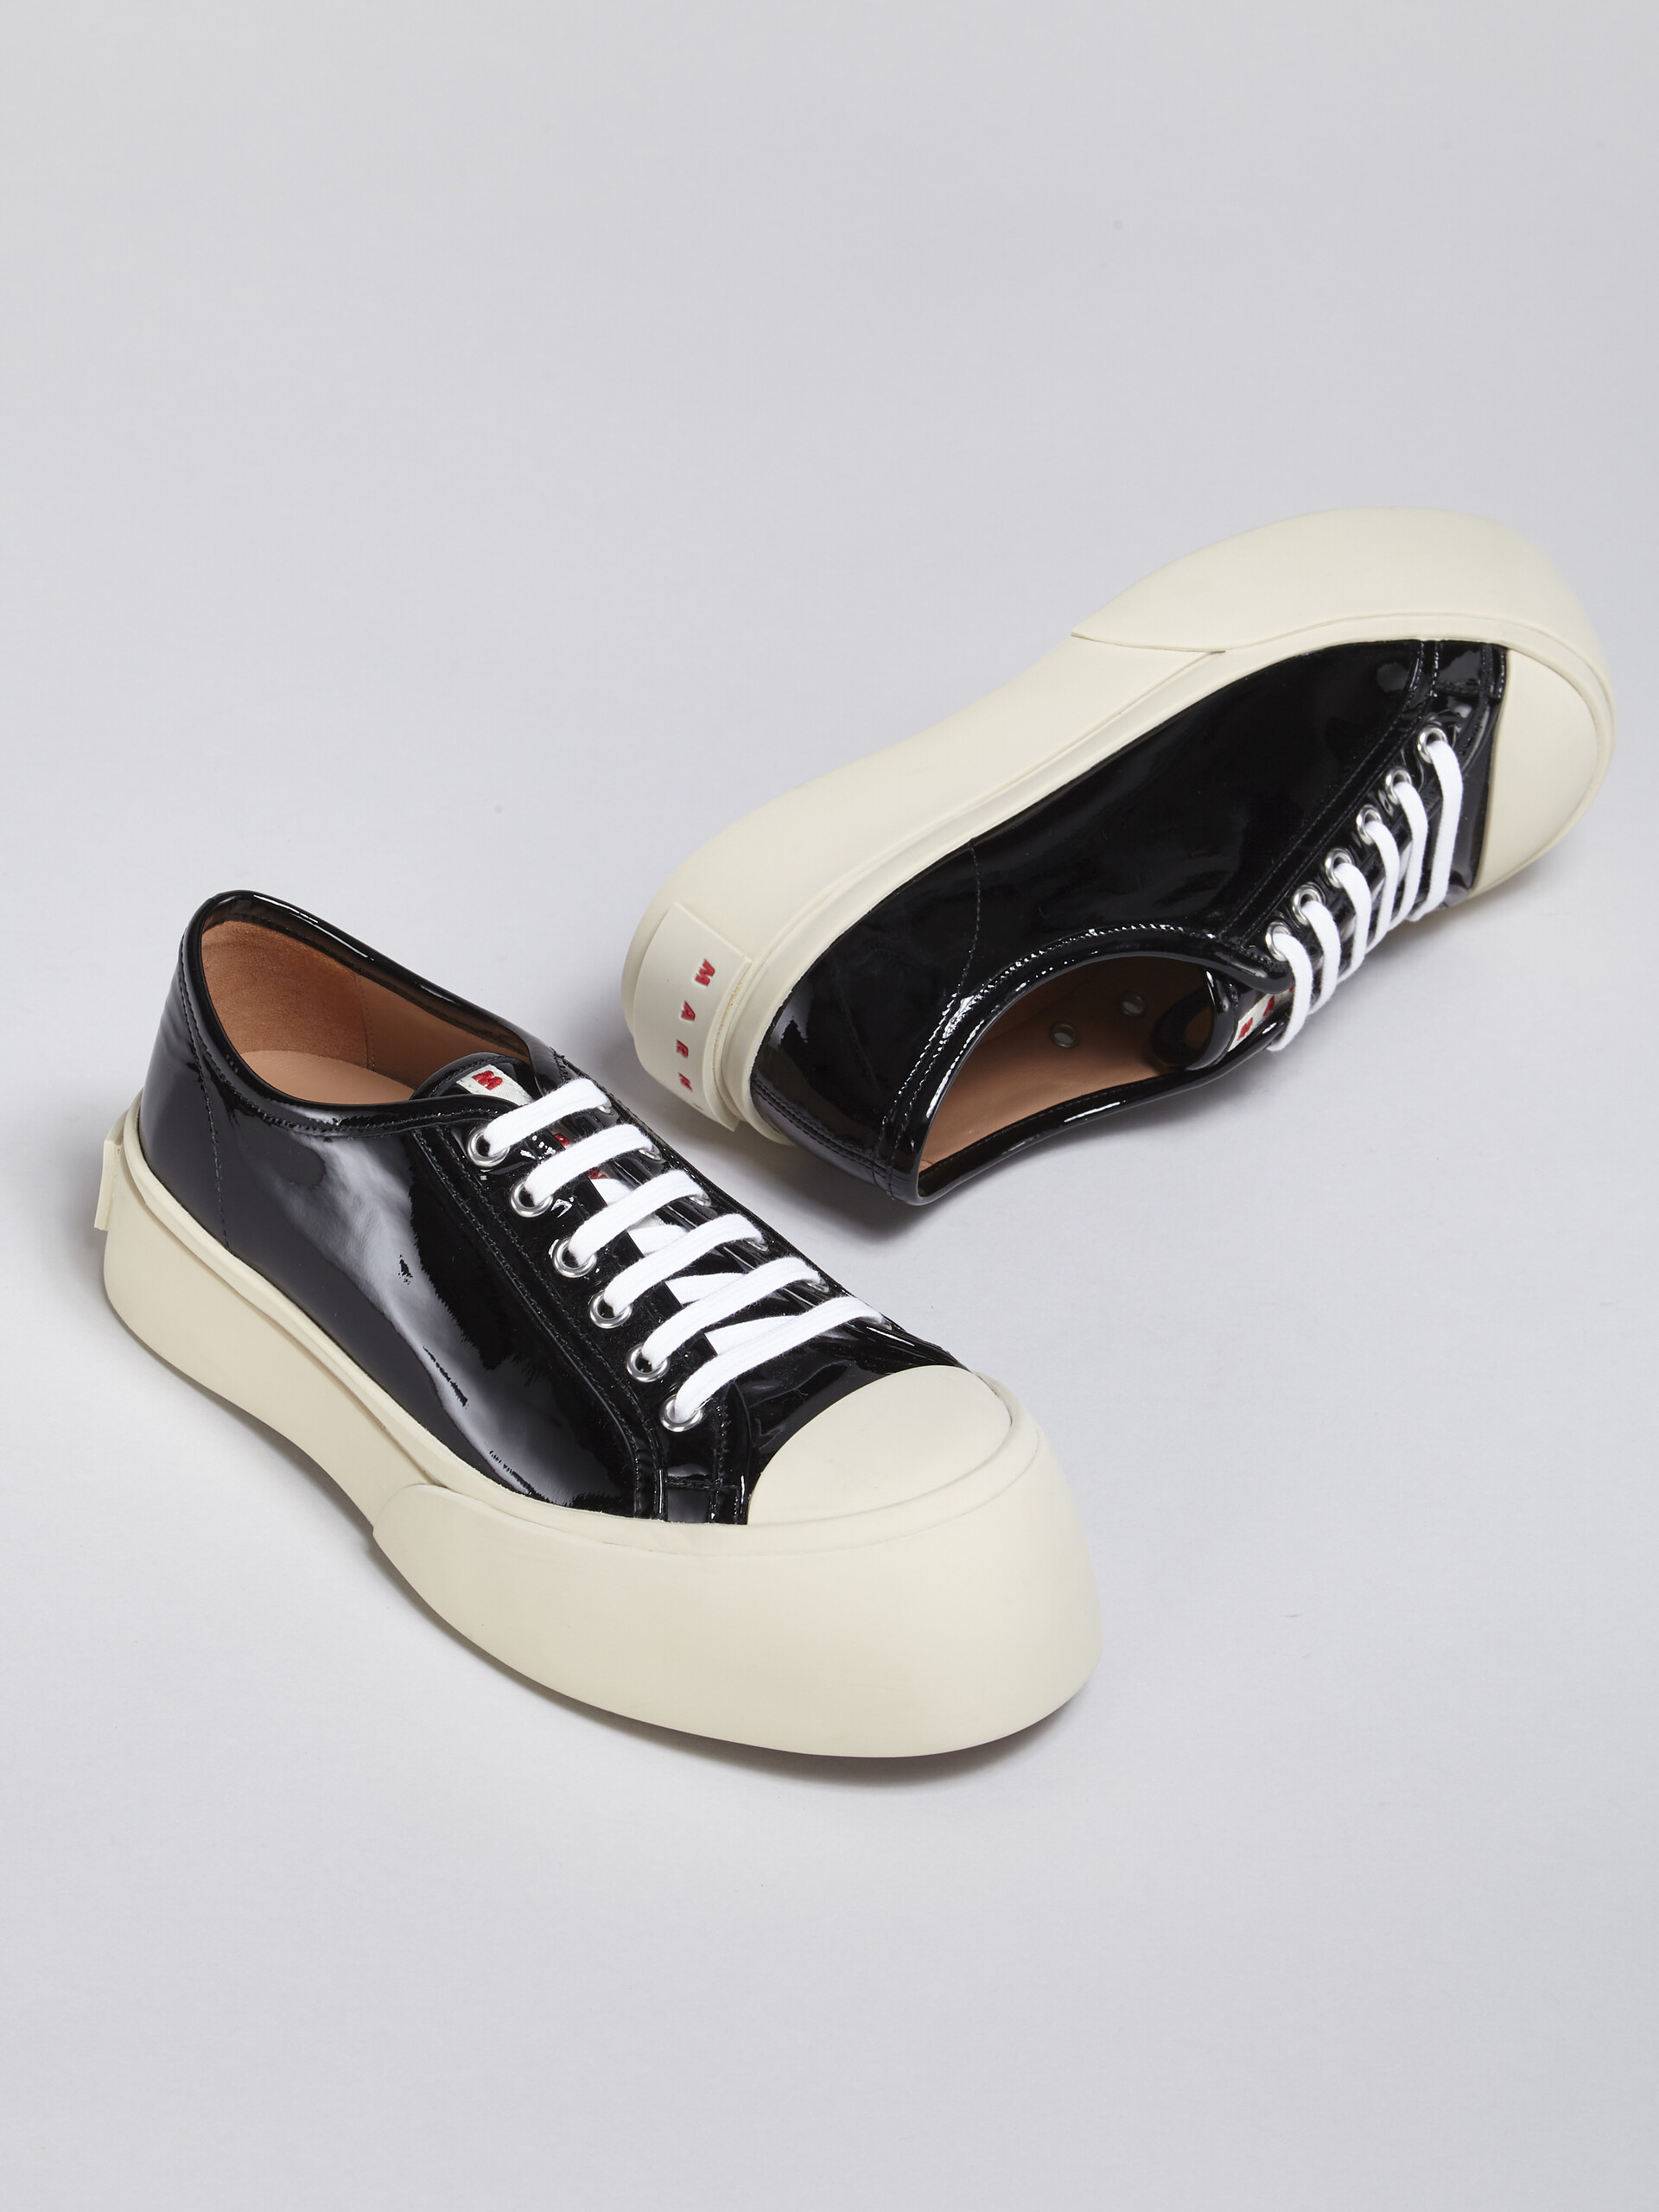 Patent leather PABLO lace-up sneaker - Sneakers - Image 5